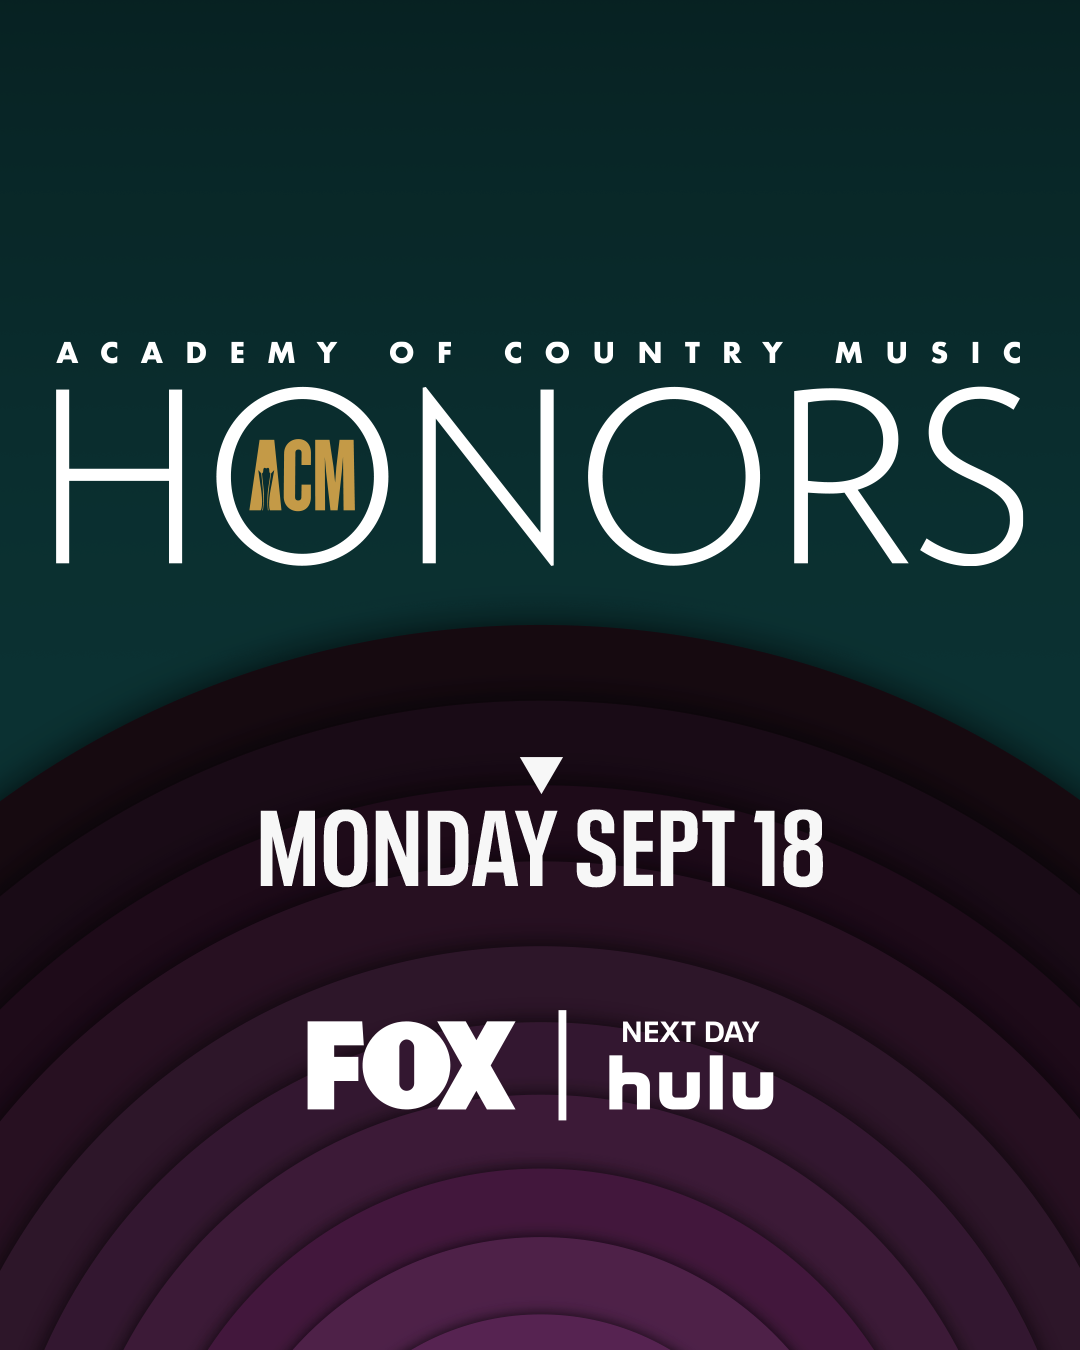 `ACM Honors` image courtesy of FOX